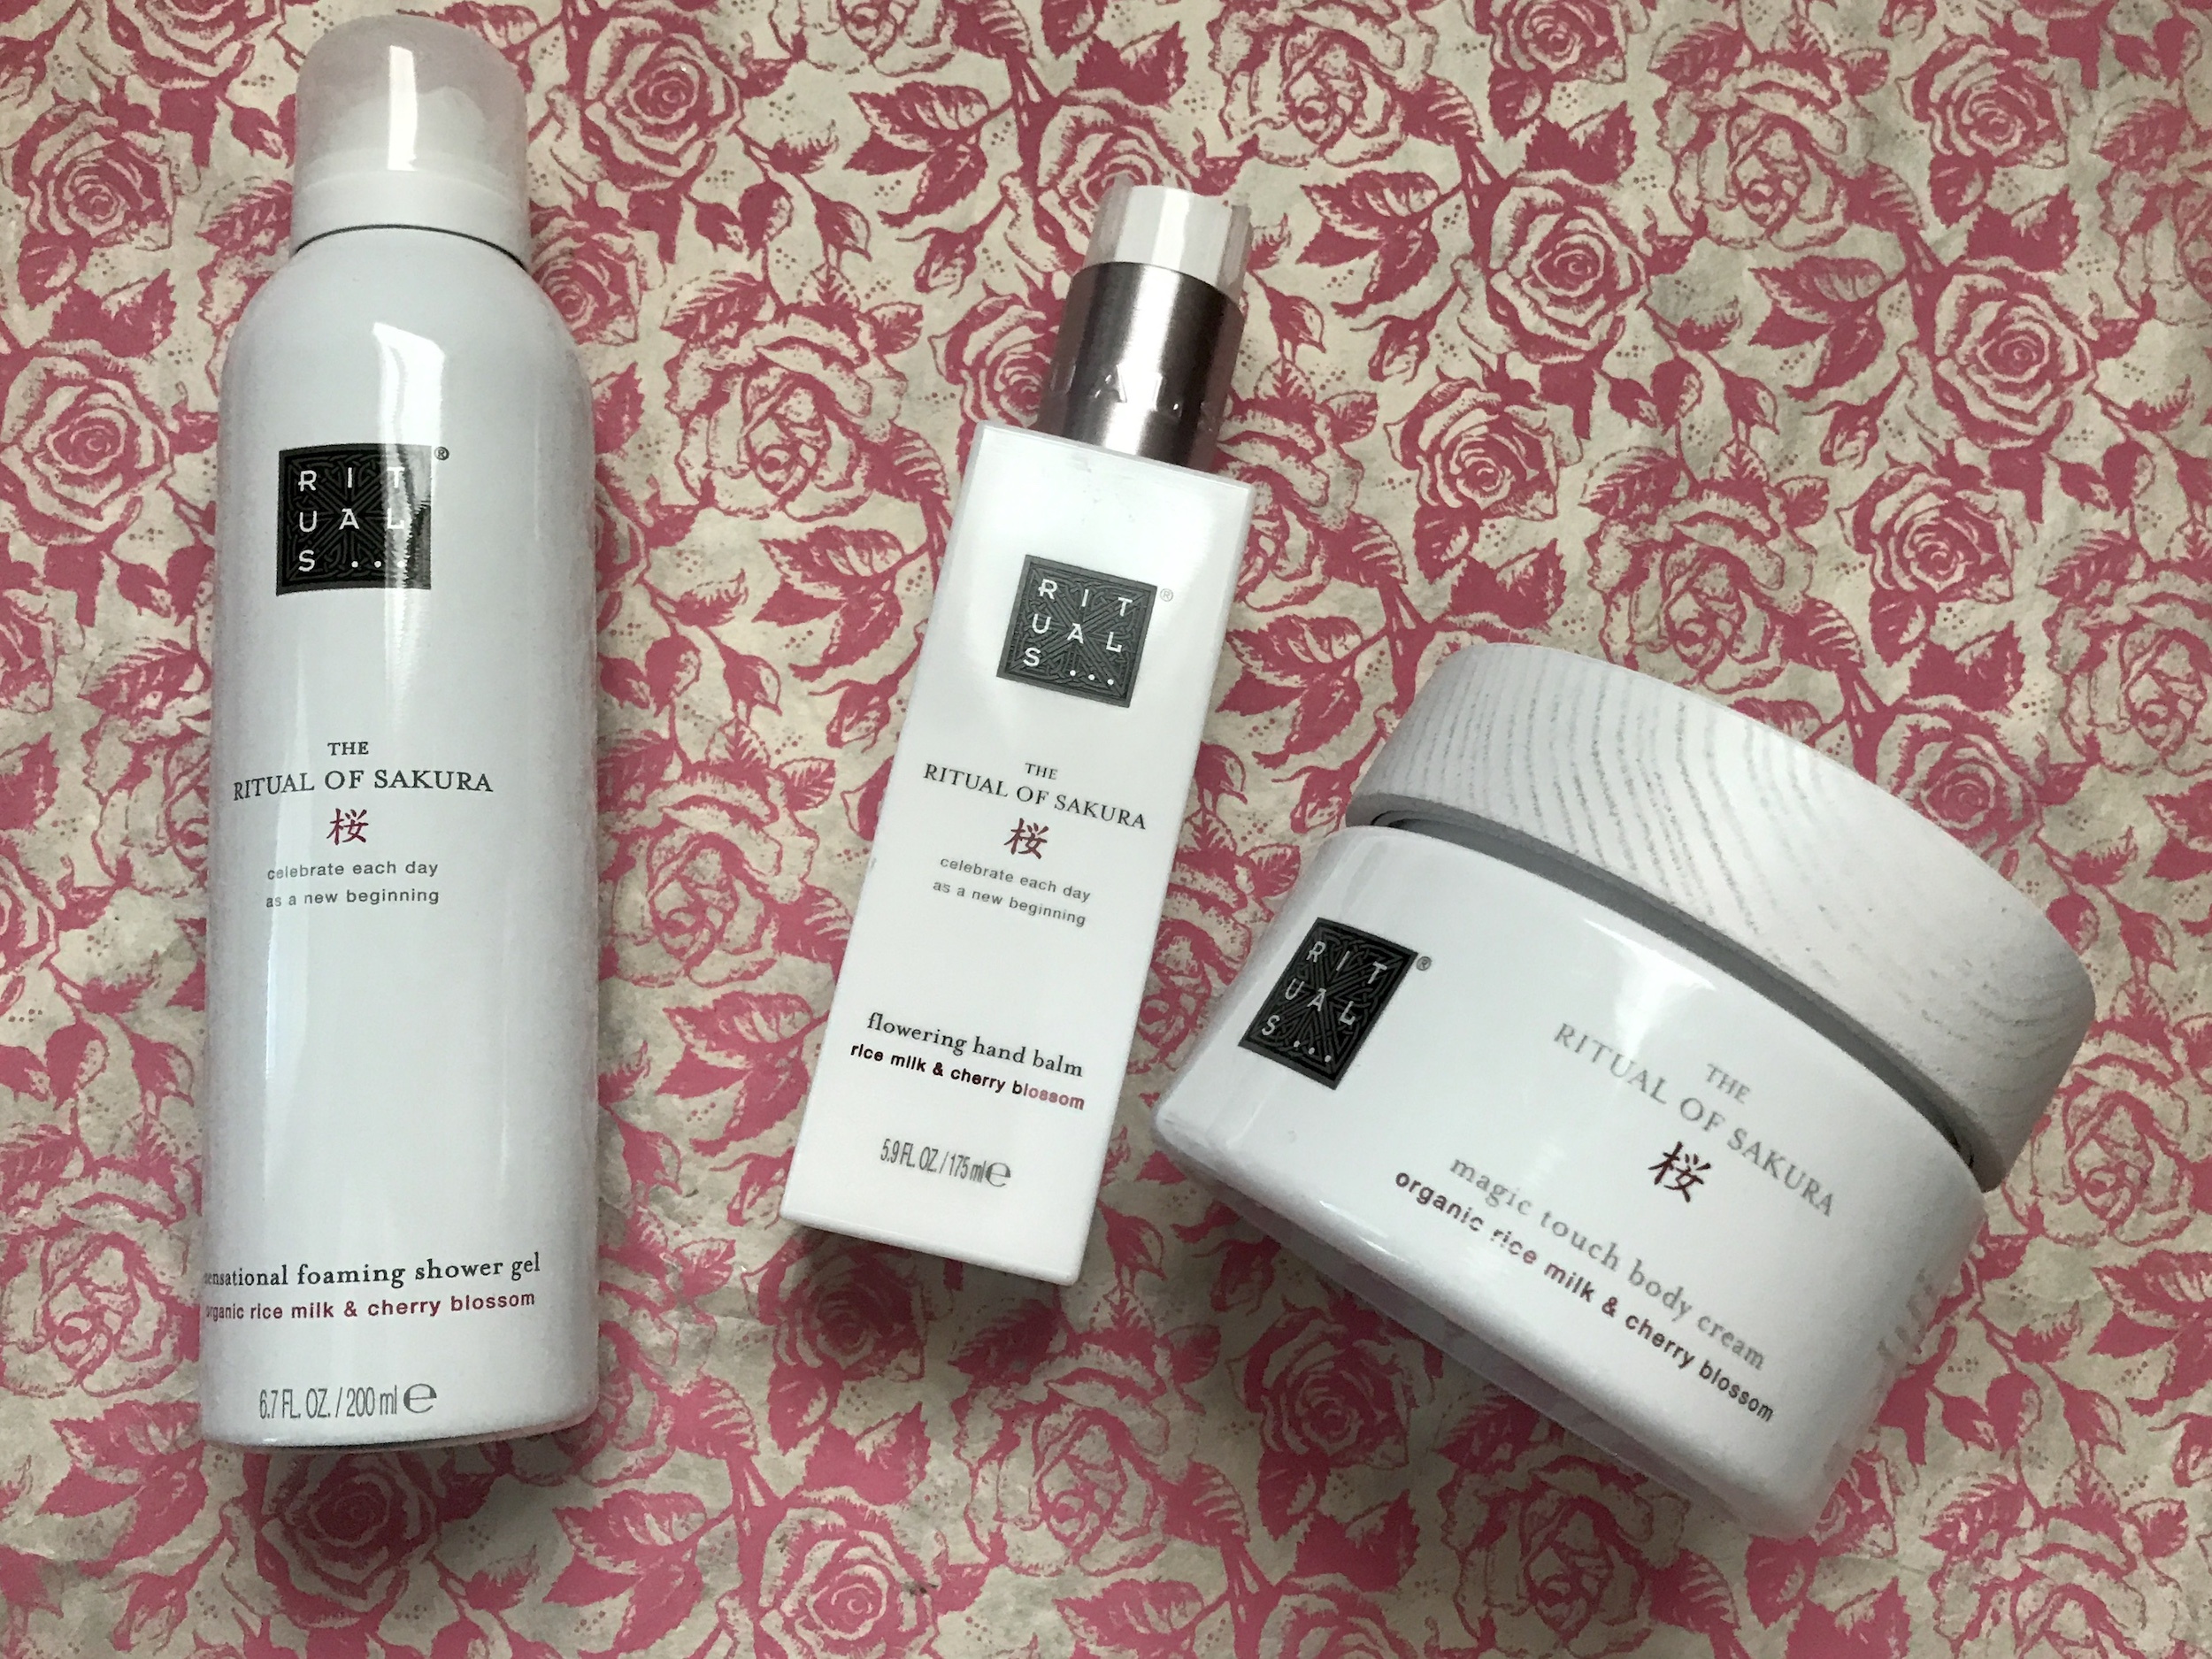 RITUALS Bath and Body Products Haul – Never Say Die Beauty